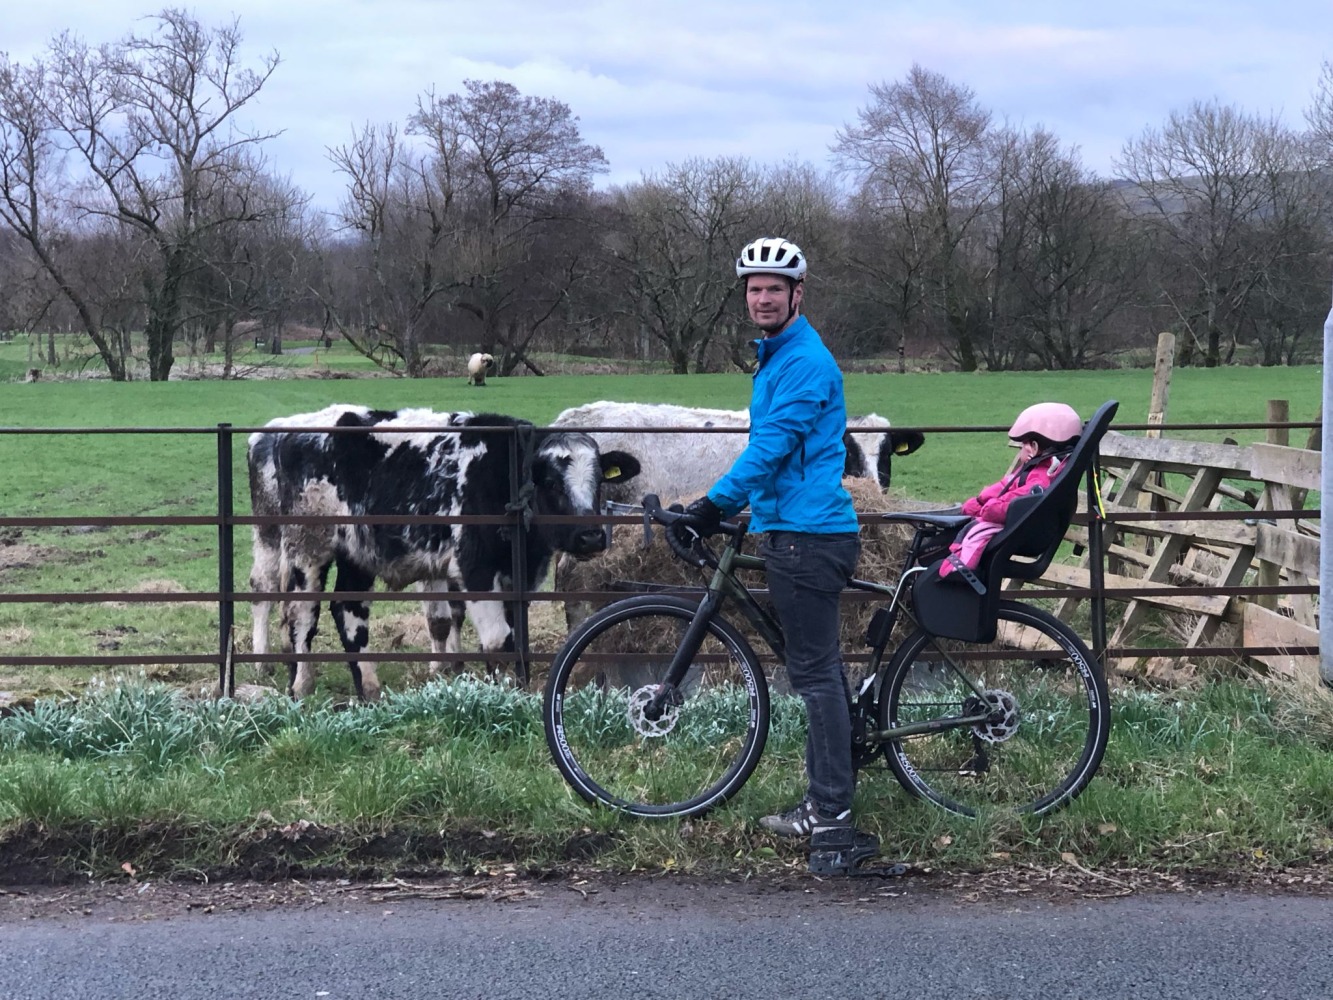 Dad and daugher on a bike ride, stopped to look at some cows